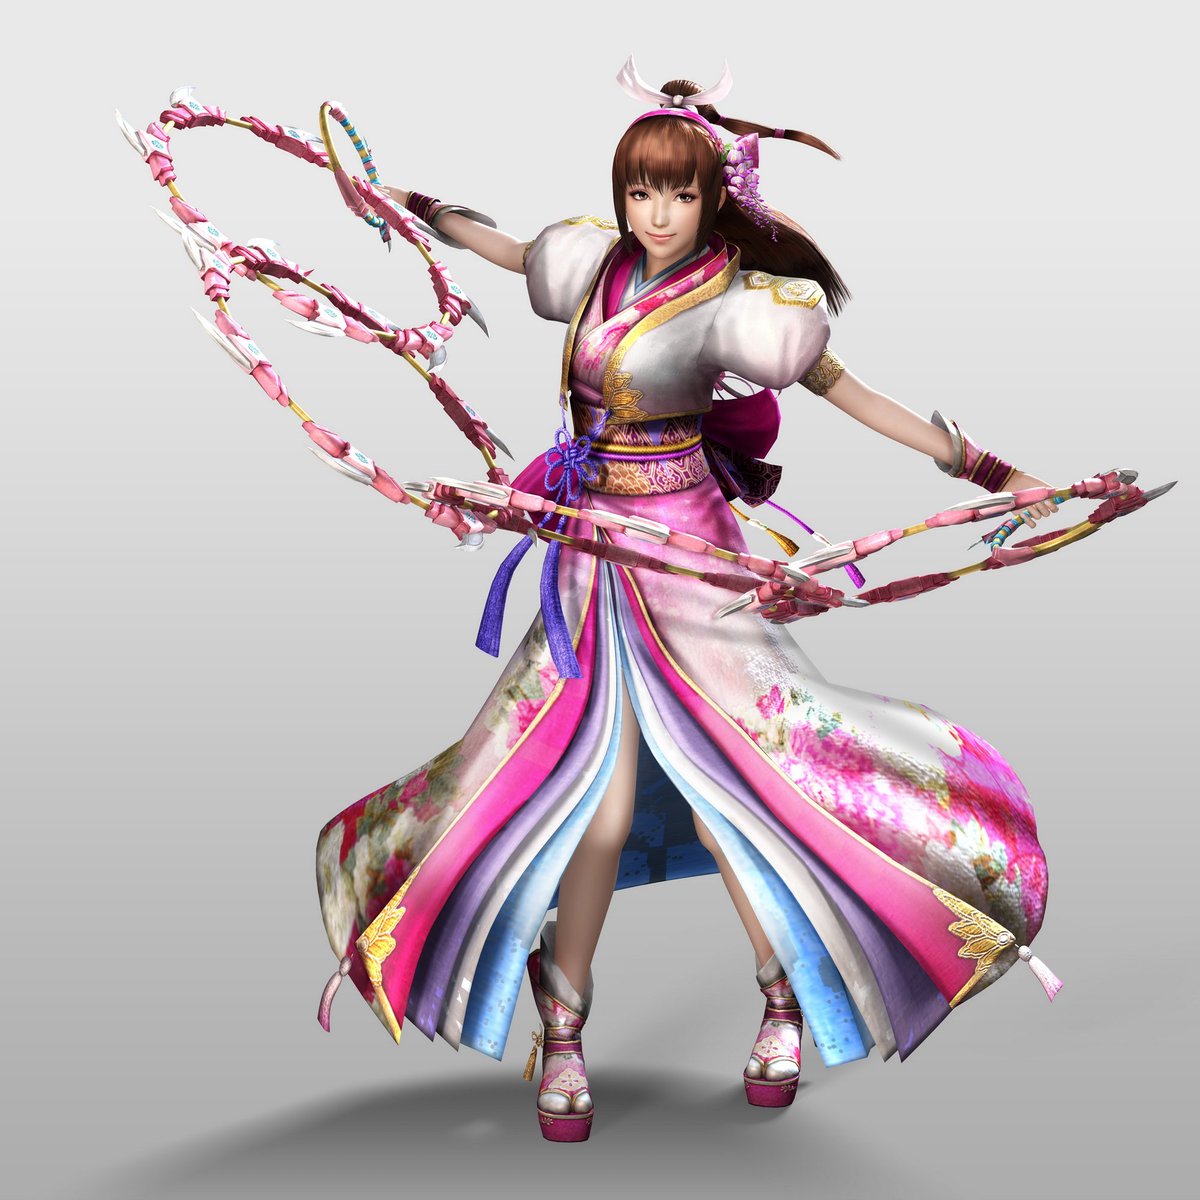 Oichi:Wasn't excited for a return to her kid form, but she looks better and less childish than her SW1 self, and while making her a more mature mother figure in SW4 was a great idea she wasn't that interesting sadlyMildly excited.